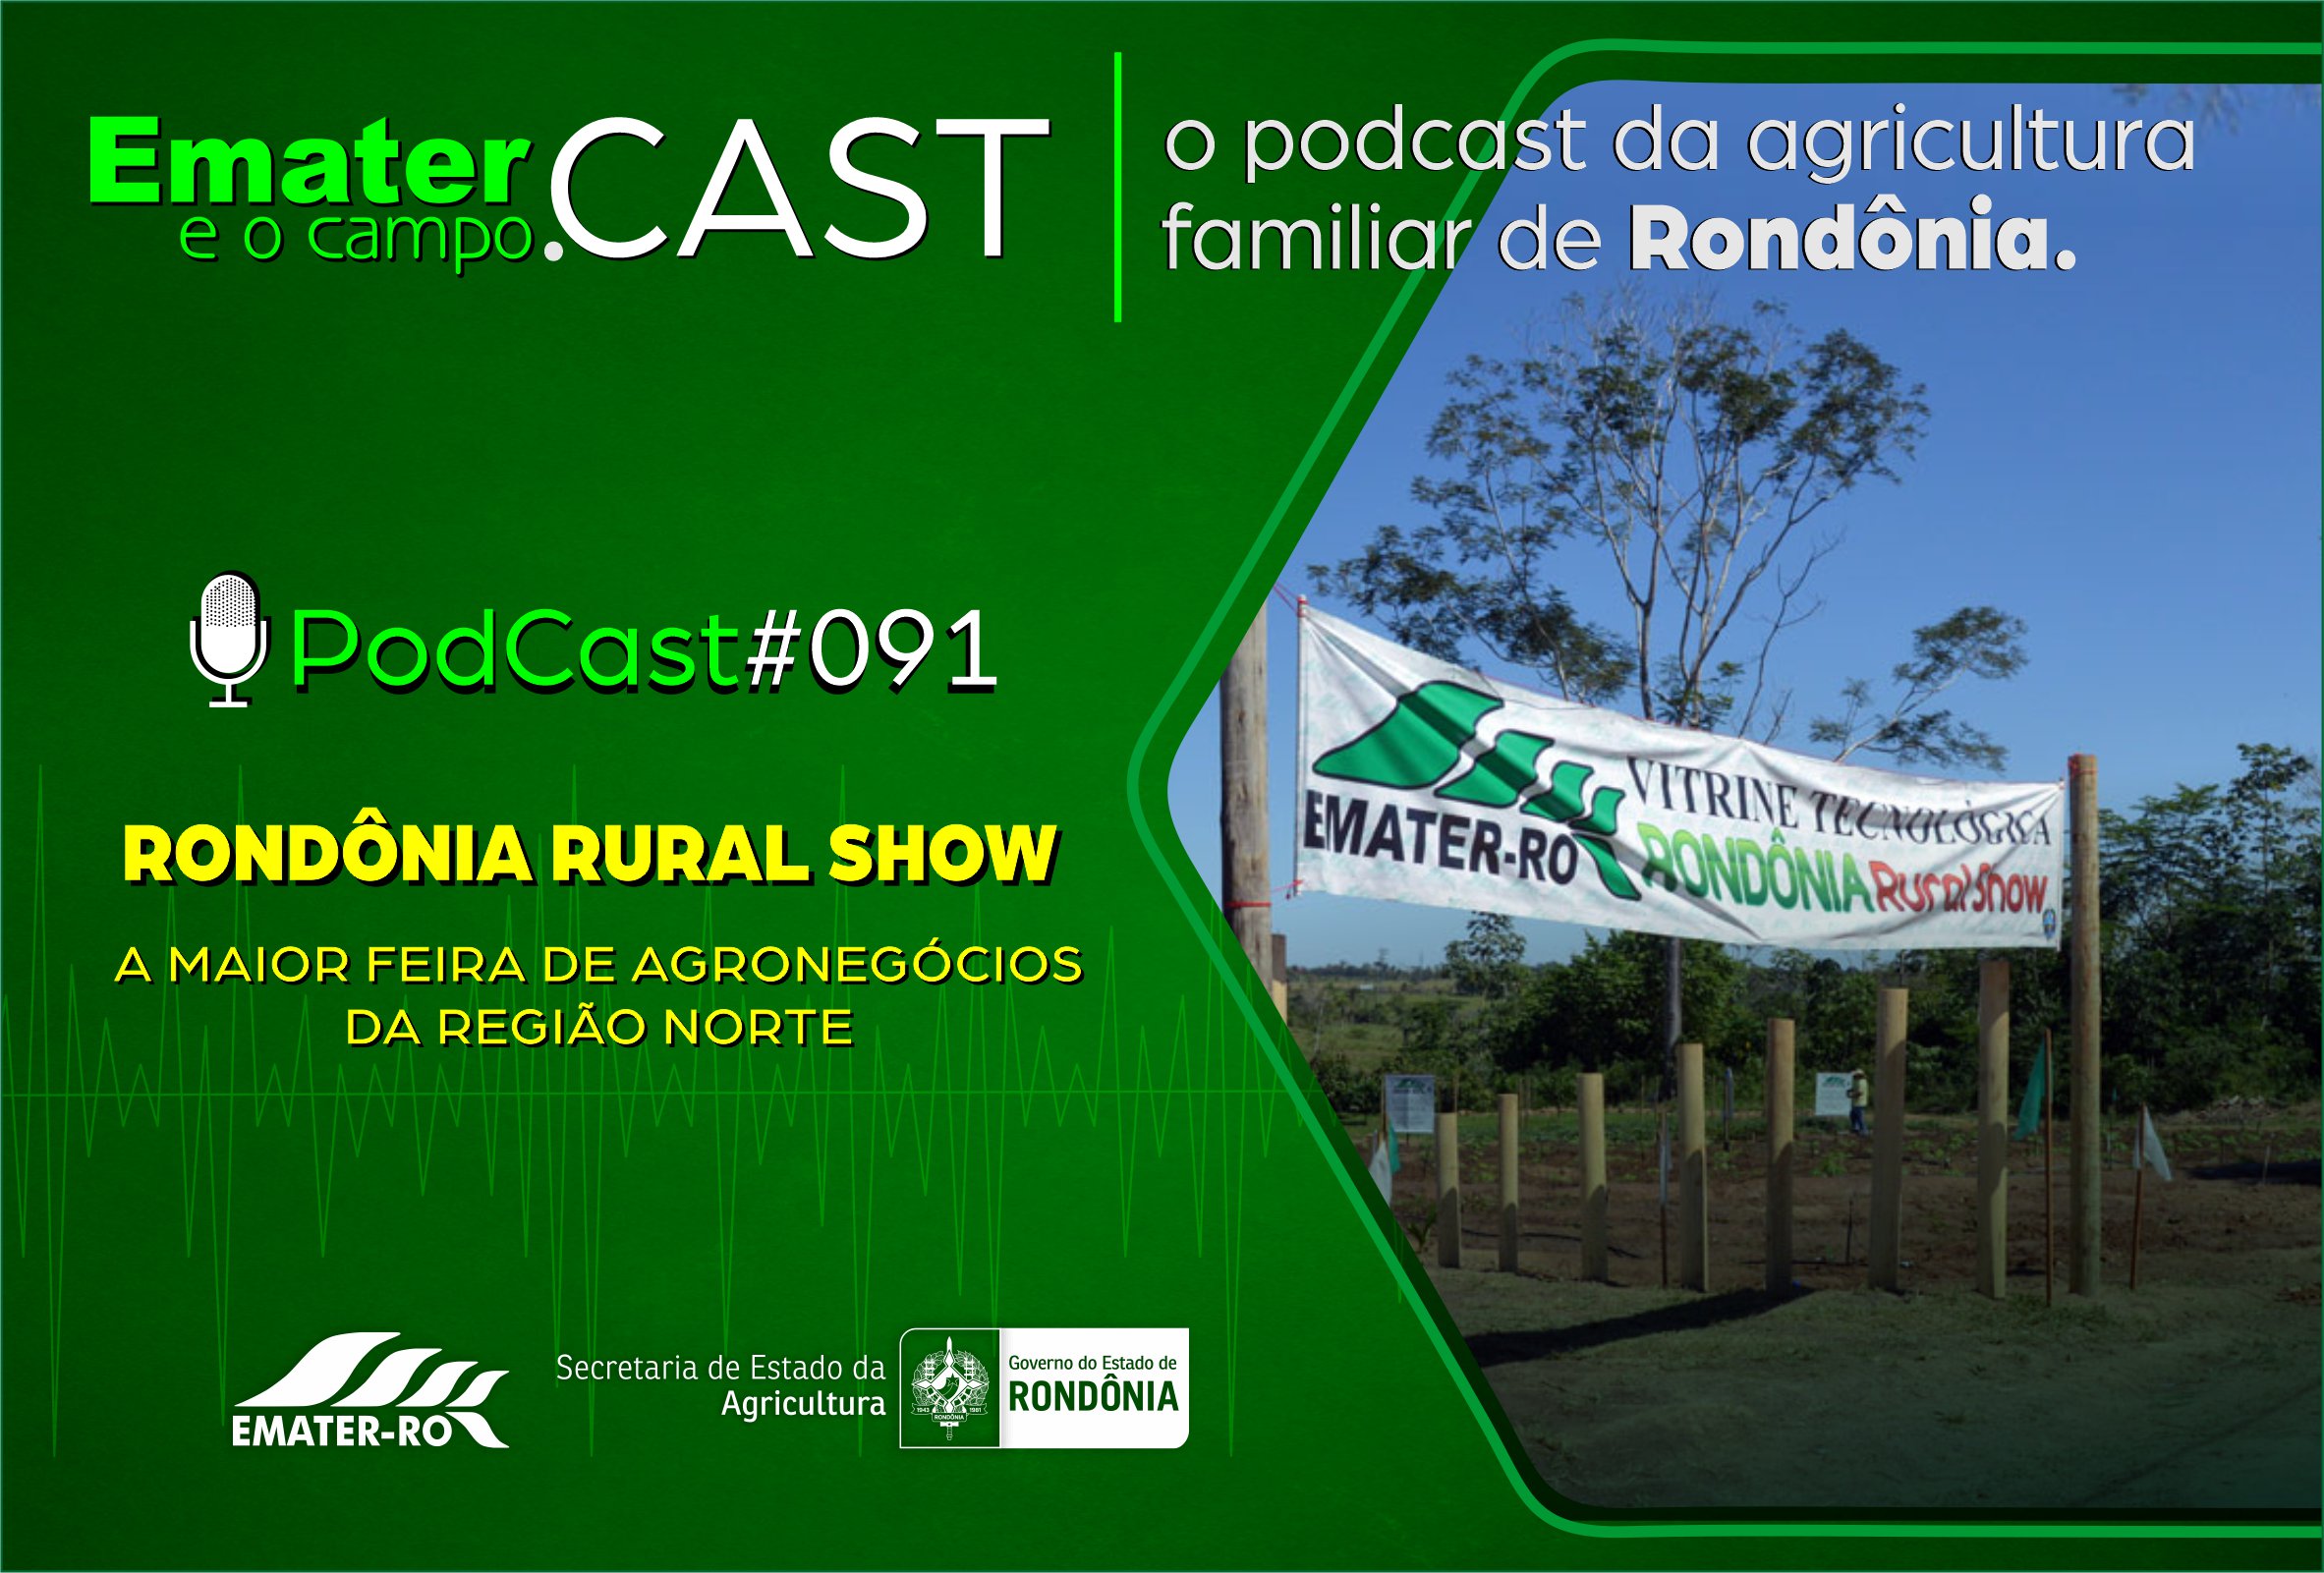 PodCast#091 Rondonia Rural Show 2022